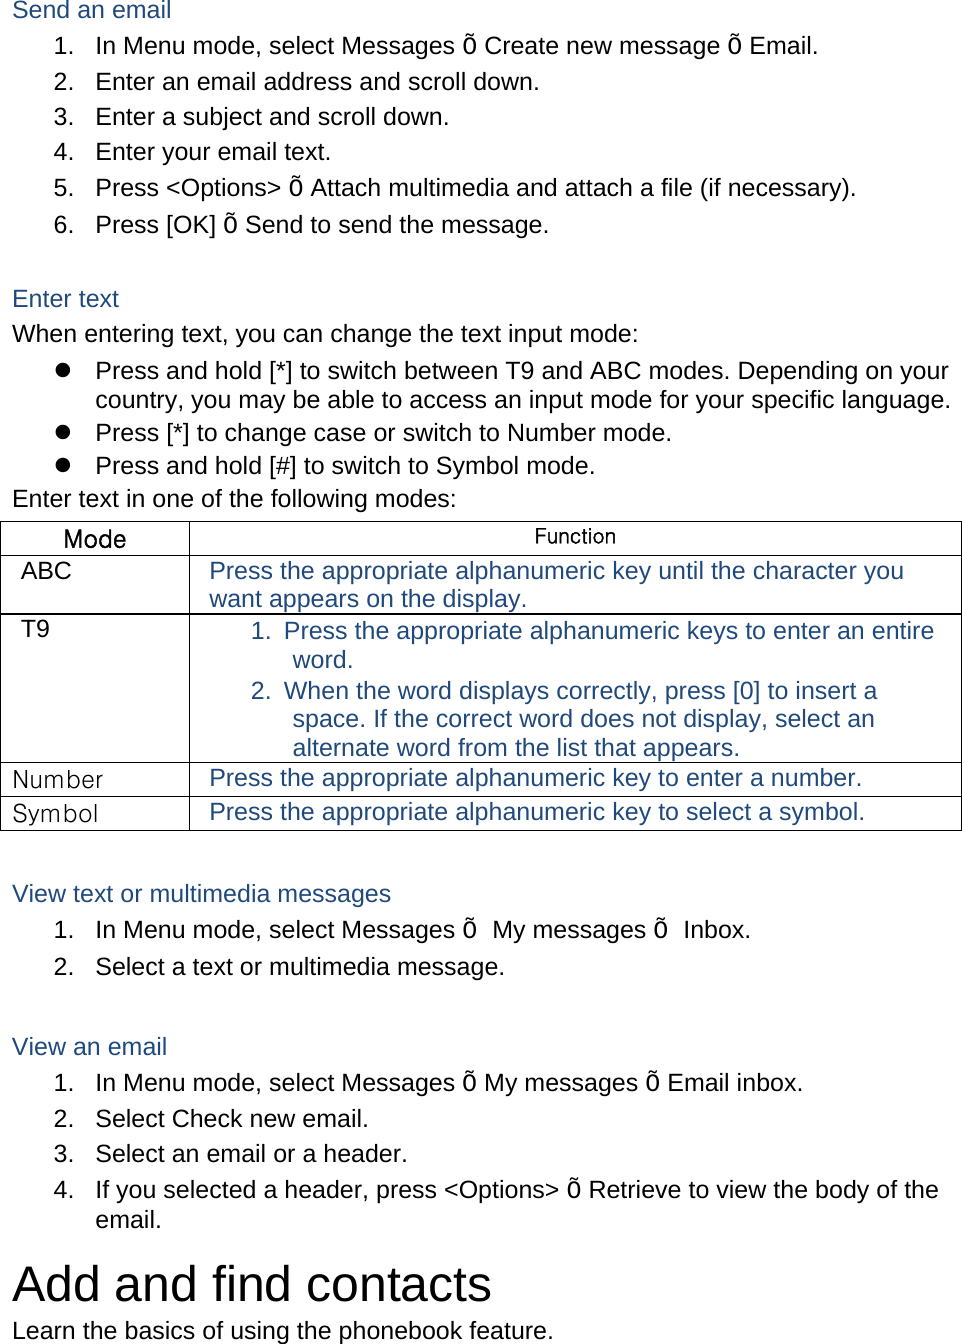    Send an email 1.  In Menu mode, select Messages Õ Create new message Õ Email. 2.  Enter an email address and scroll down. 3.  Enter a subject and scroll down. 4.  Enter your email text. 5. Press &lt;Options&gt; Õ Attach multimedia and attach a file (if necessary). 6. Press [OK] Õ Send to send the message.  Enter text When entering text, you can change the text input mode:   Press and hold [*] to switch between T9 and ABC modes. Depending on your country, you may be able to access an input mode for your specific language.   Press [*] to change case or switch to Number mode.   Press and hold [#] to switch to Symbol mode. Enter text in one of the following modes: Mode  Function ABC  Press the appropriate alphanumeric key until the character you want appears on the display. T9  1.  Press the appropriate alphanumeric keys to enter an entire word. 2.  When the word displays correctly, press [0] to insert a space. If the correct word does not display, select an alternate word from the list that appears. Number  Press the appropriate alphanumeric key to enter a number. Symbol  Press the appropriate alphanumeric key to select a symbol.  View text or multimedia messages 1.  In Menu mode, select Messages Õ My messages Õ Inbox. 2.  Select a text or multimedia message.  View an email 1.  In Menu mode, select Messages Õ My messages Õ Email inbox. 2.  Select Check new email. 3.  Select an email or a header. 4.  If you selected a header, press &lt;Options&gt; Õ Retrieve to view the body of the email. Add and find contacts Learn the basics of using the phonebook feature. 